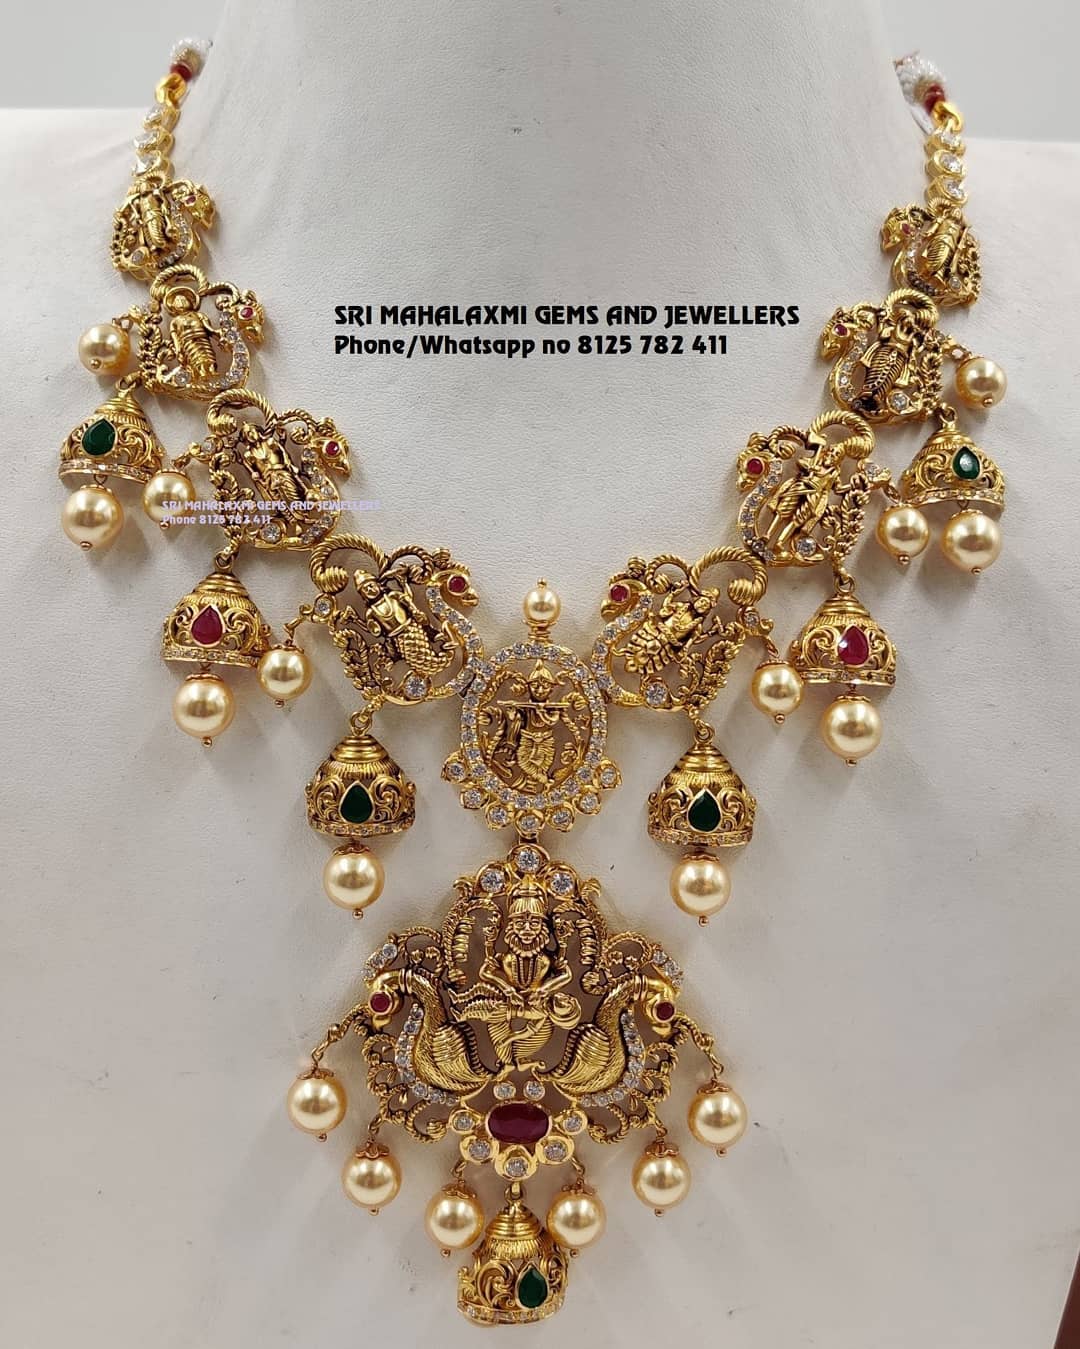 Traditional Gold Necklace From Sri Mahalakshmi Gems And Jewellers ...